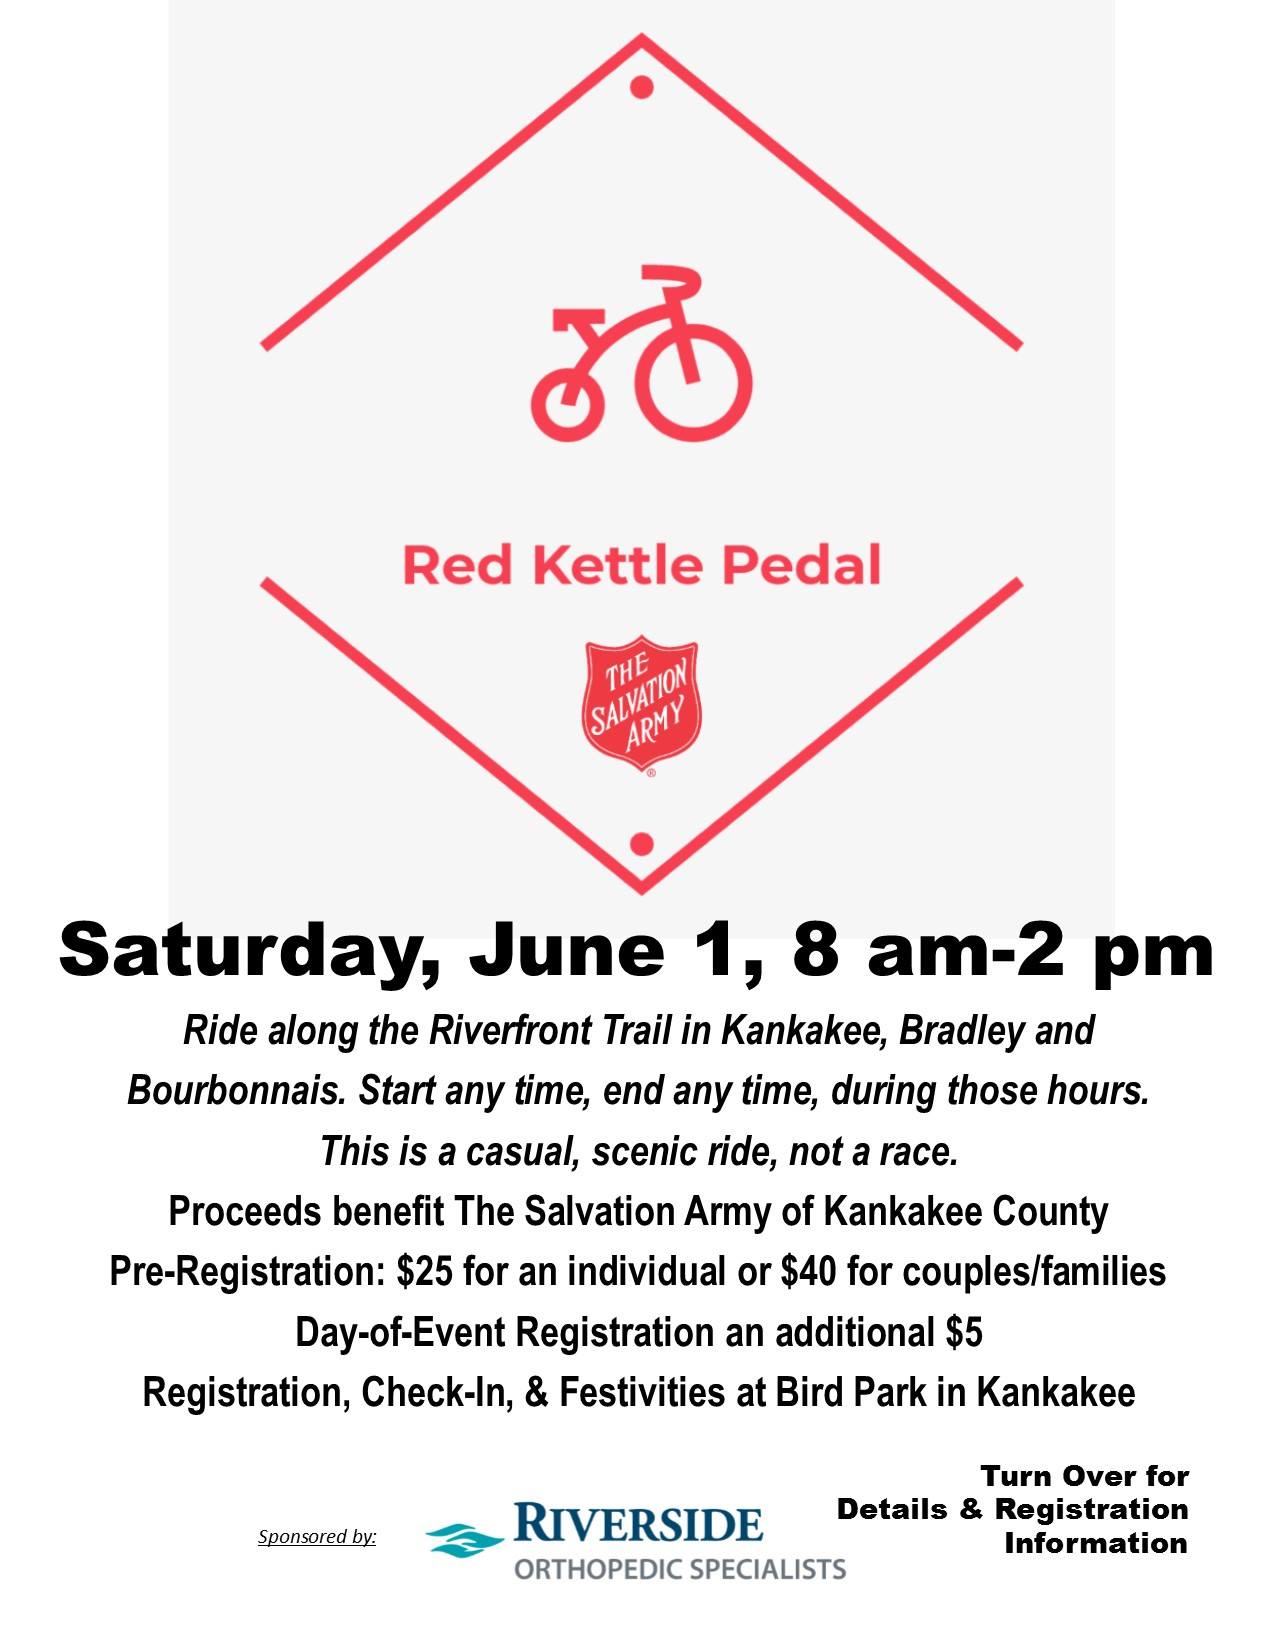 Red Kettle Pedal Fundraiser